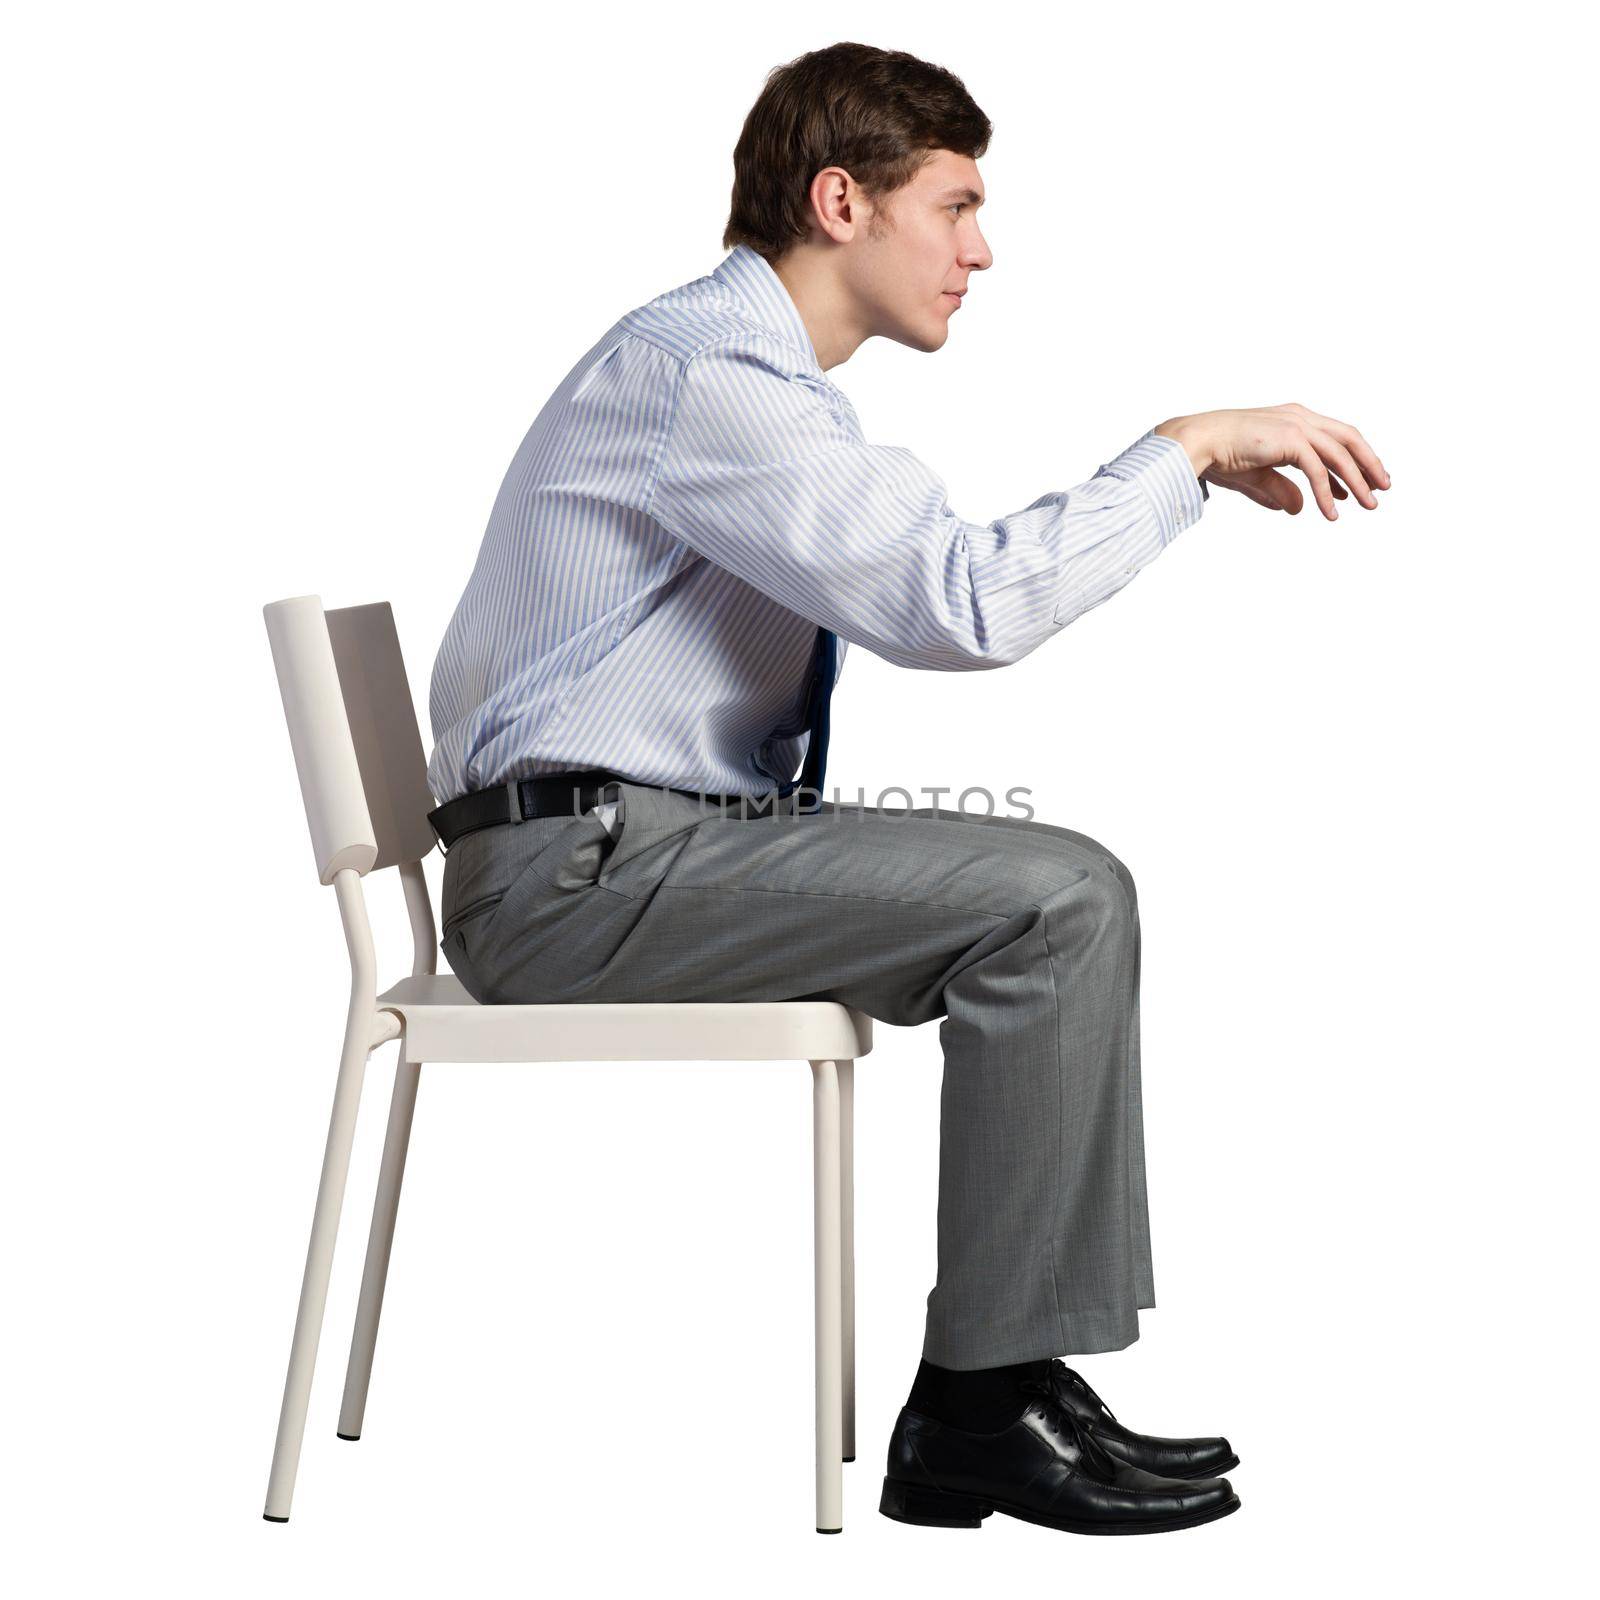 businessman sits on a chair by adam121